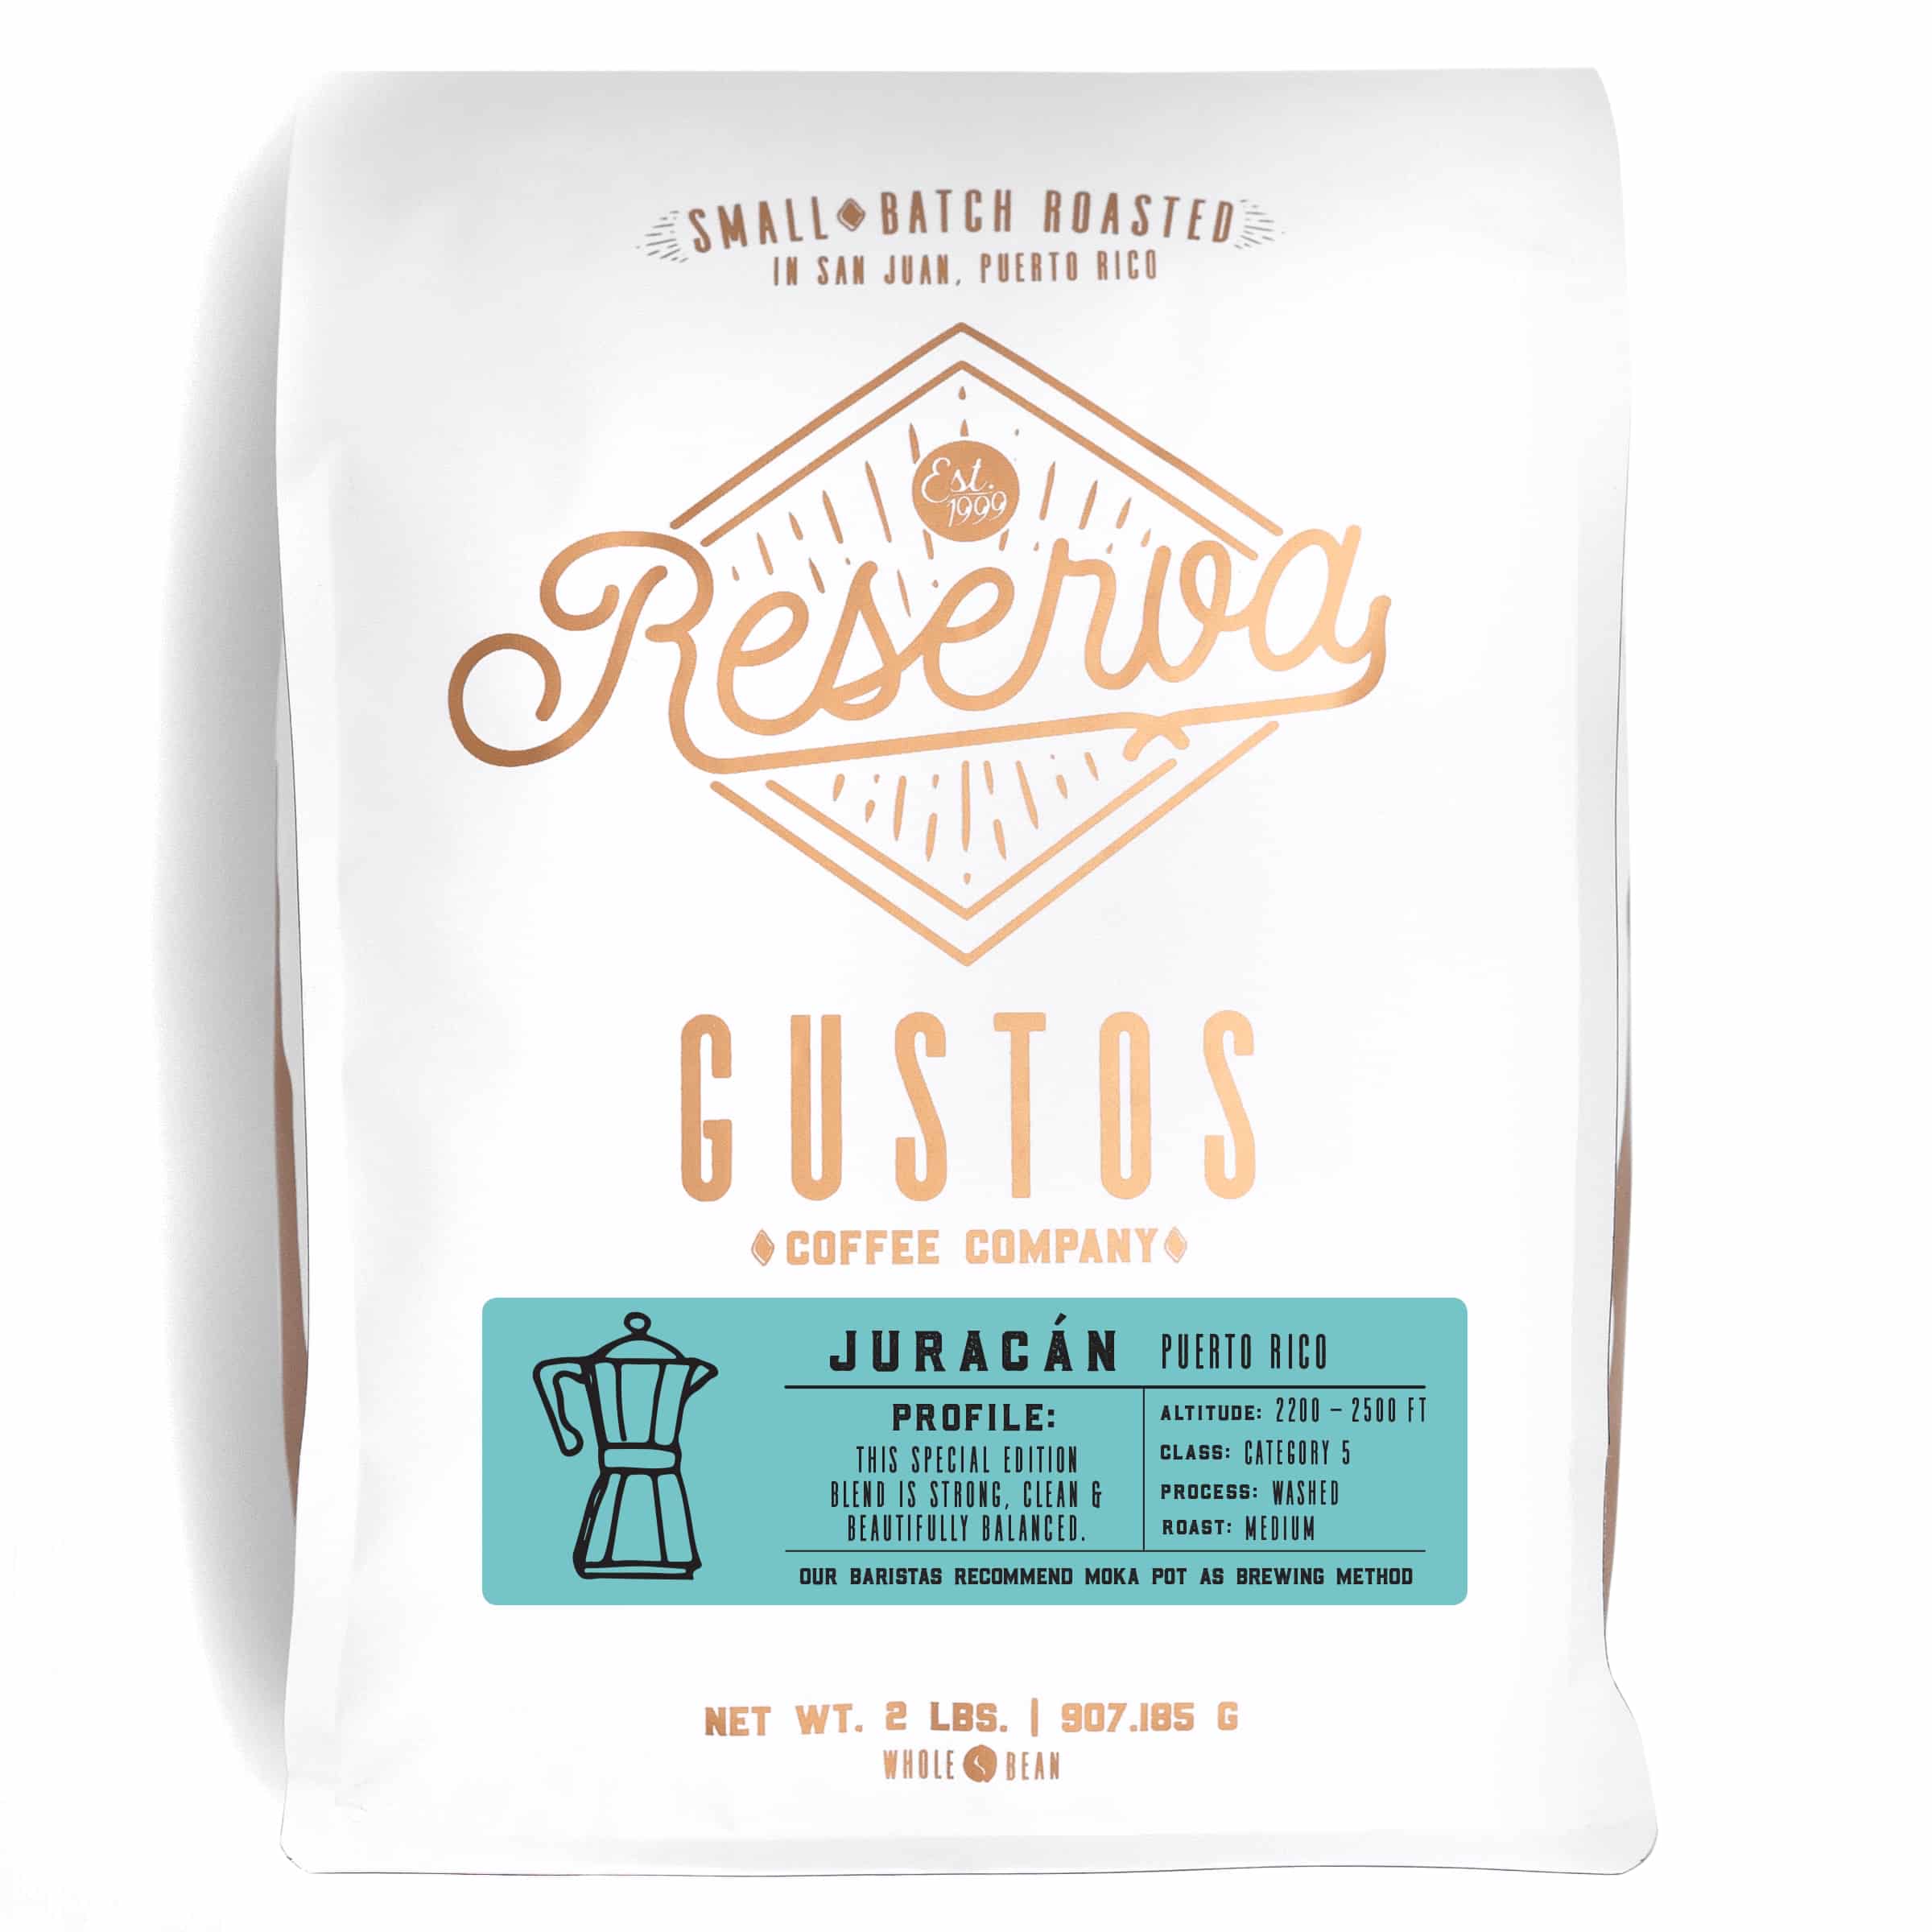 A 2lb bag of Specialty Coffee from PR Juracán by Gustos Coffee Co